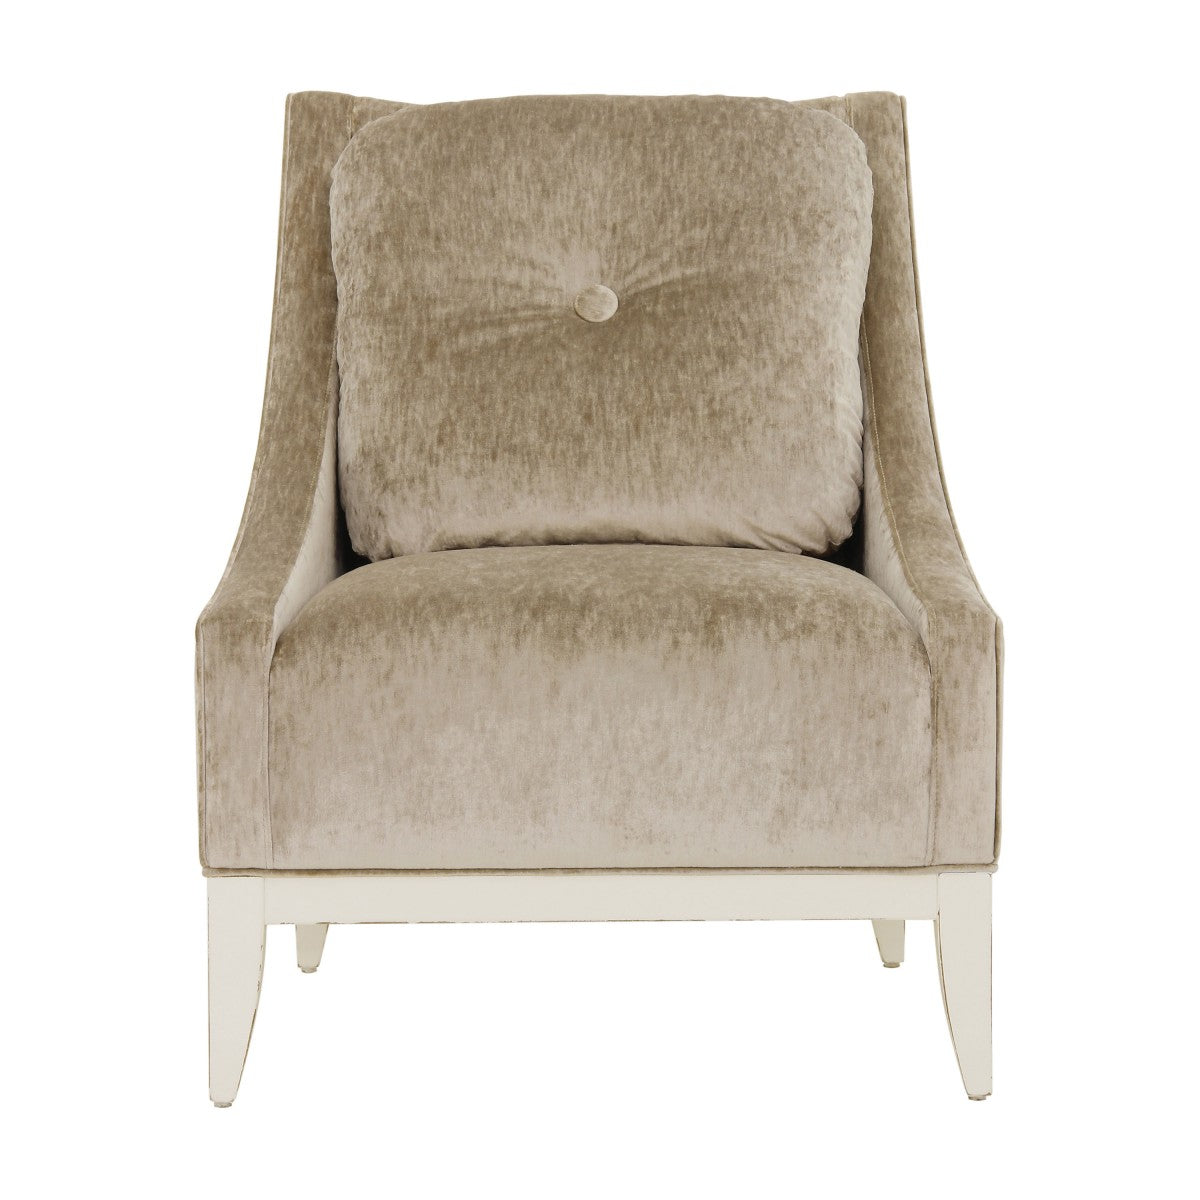 Dorotea Bespoke Upholstered Contemporary Armchair MS595P Custom Made To Order